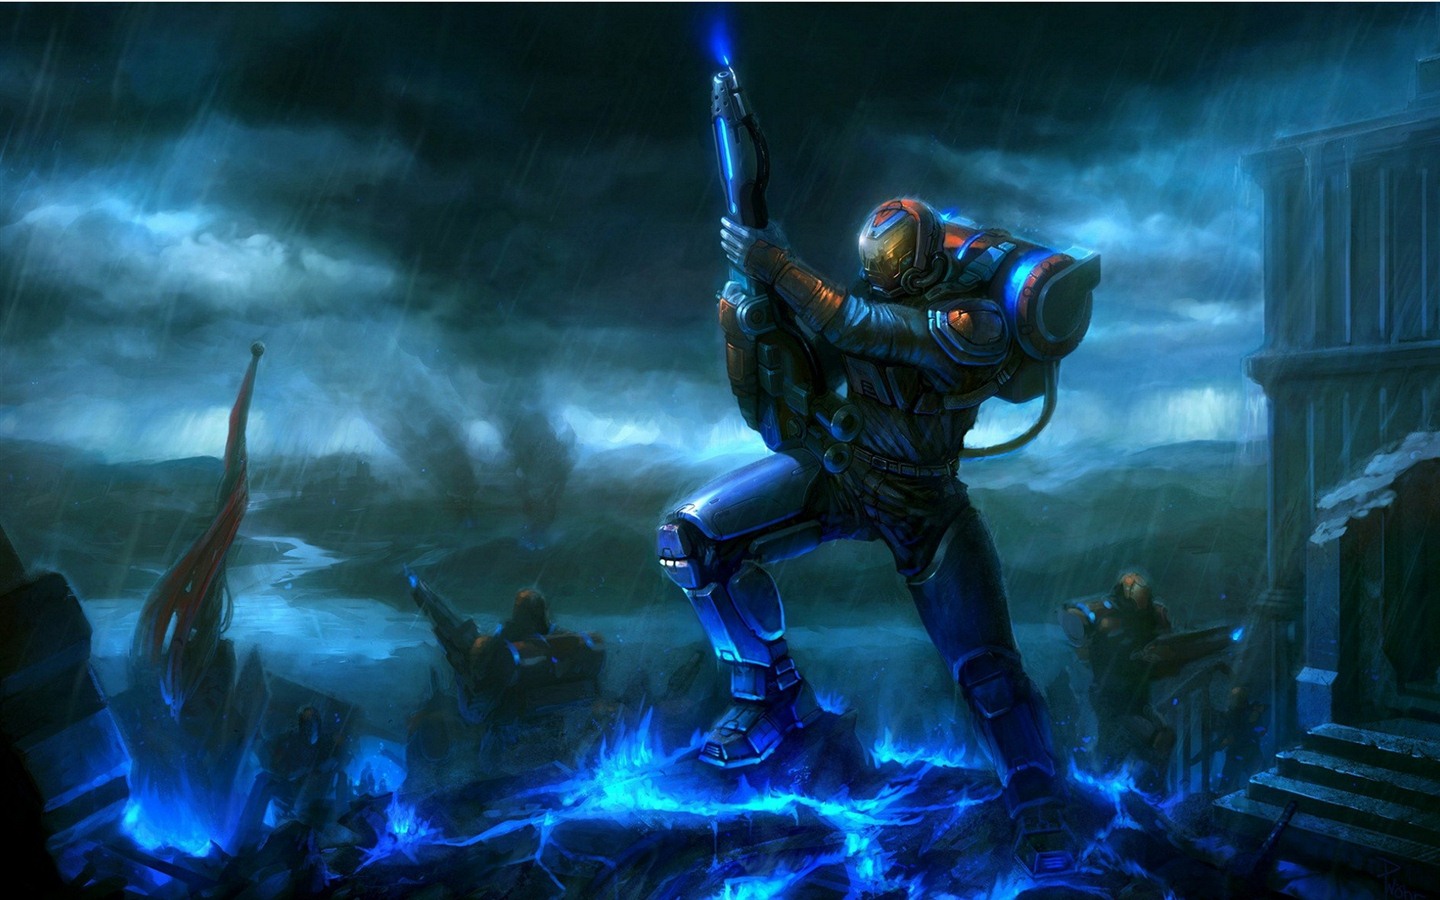 Halo game HD wallpapers #6 - 1440x900